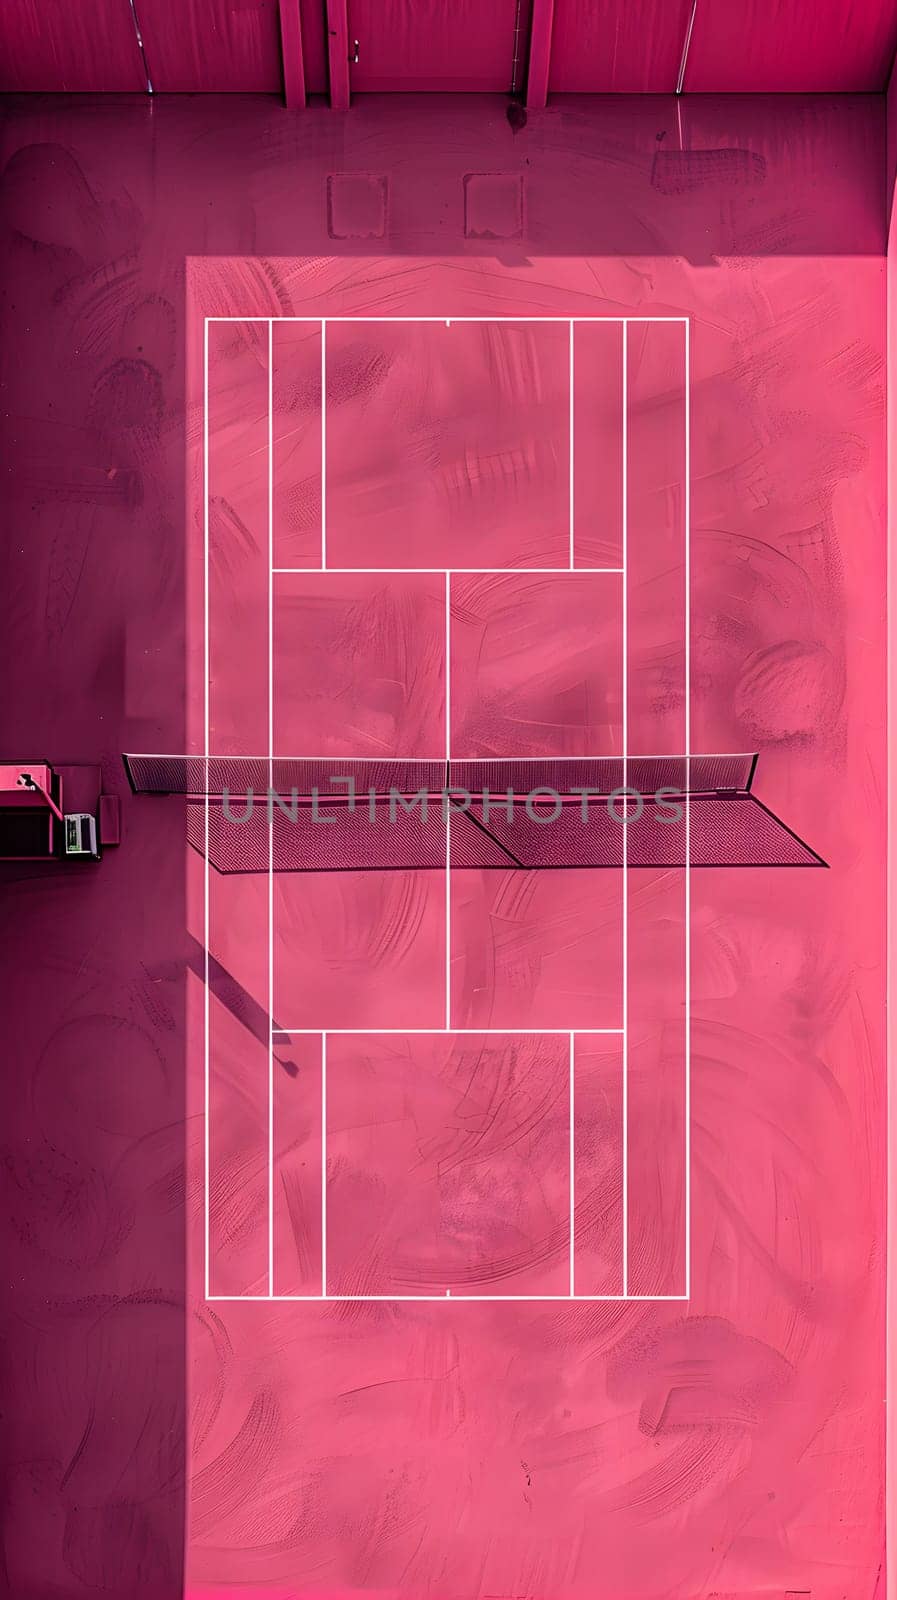 Rectangle tennis court in a pink room with violet accents and wood flooring by Nadtochiy